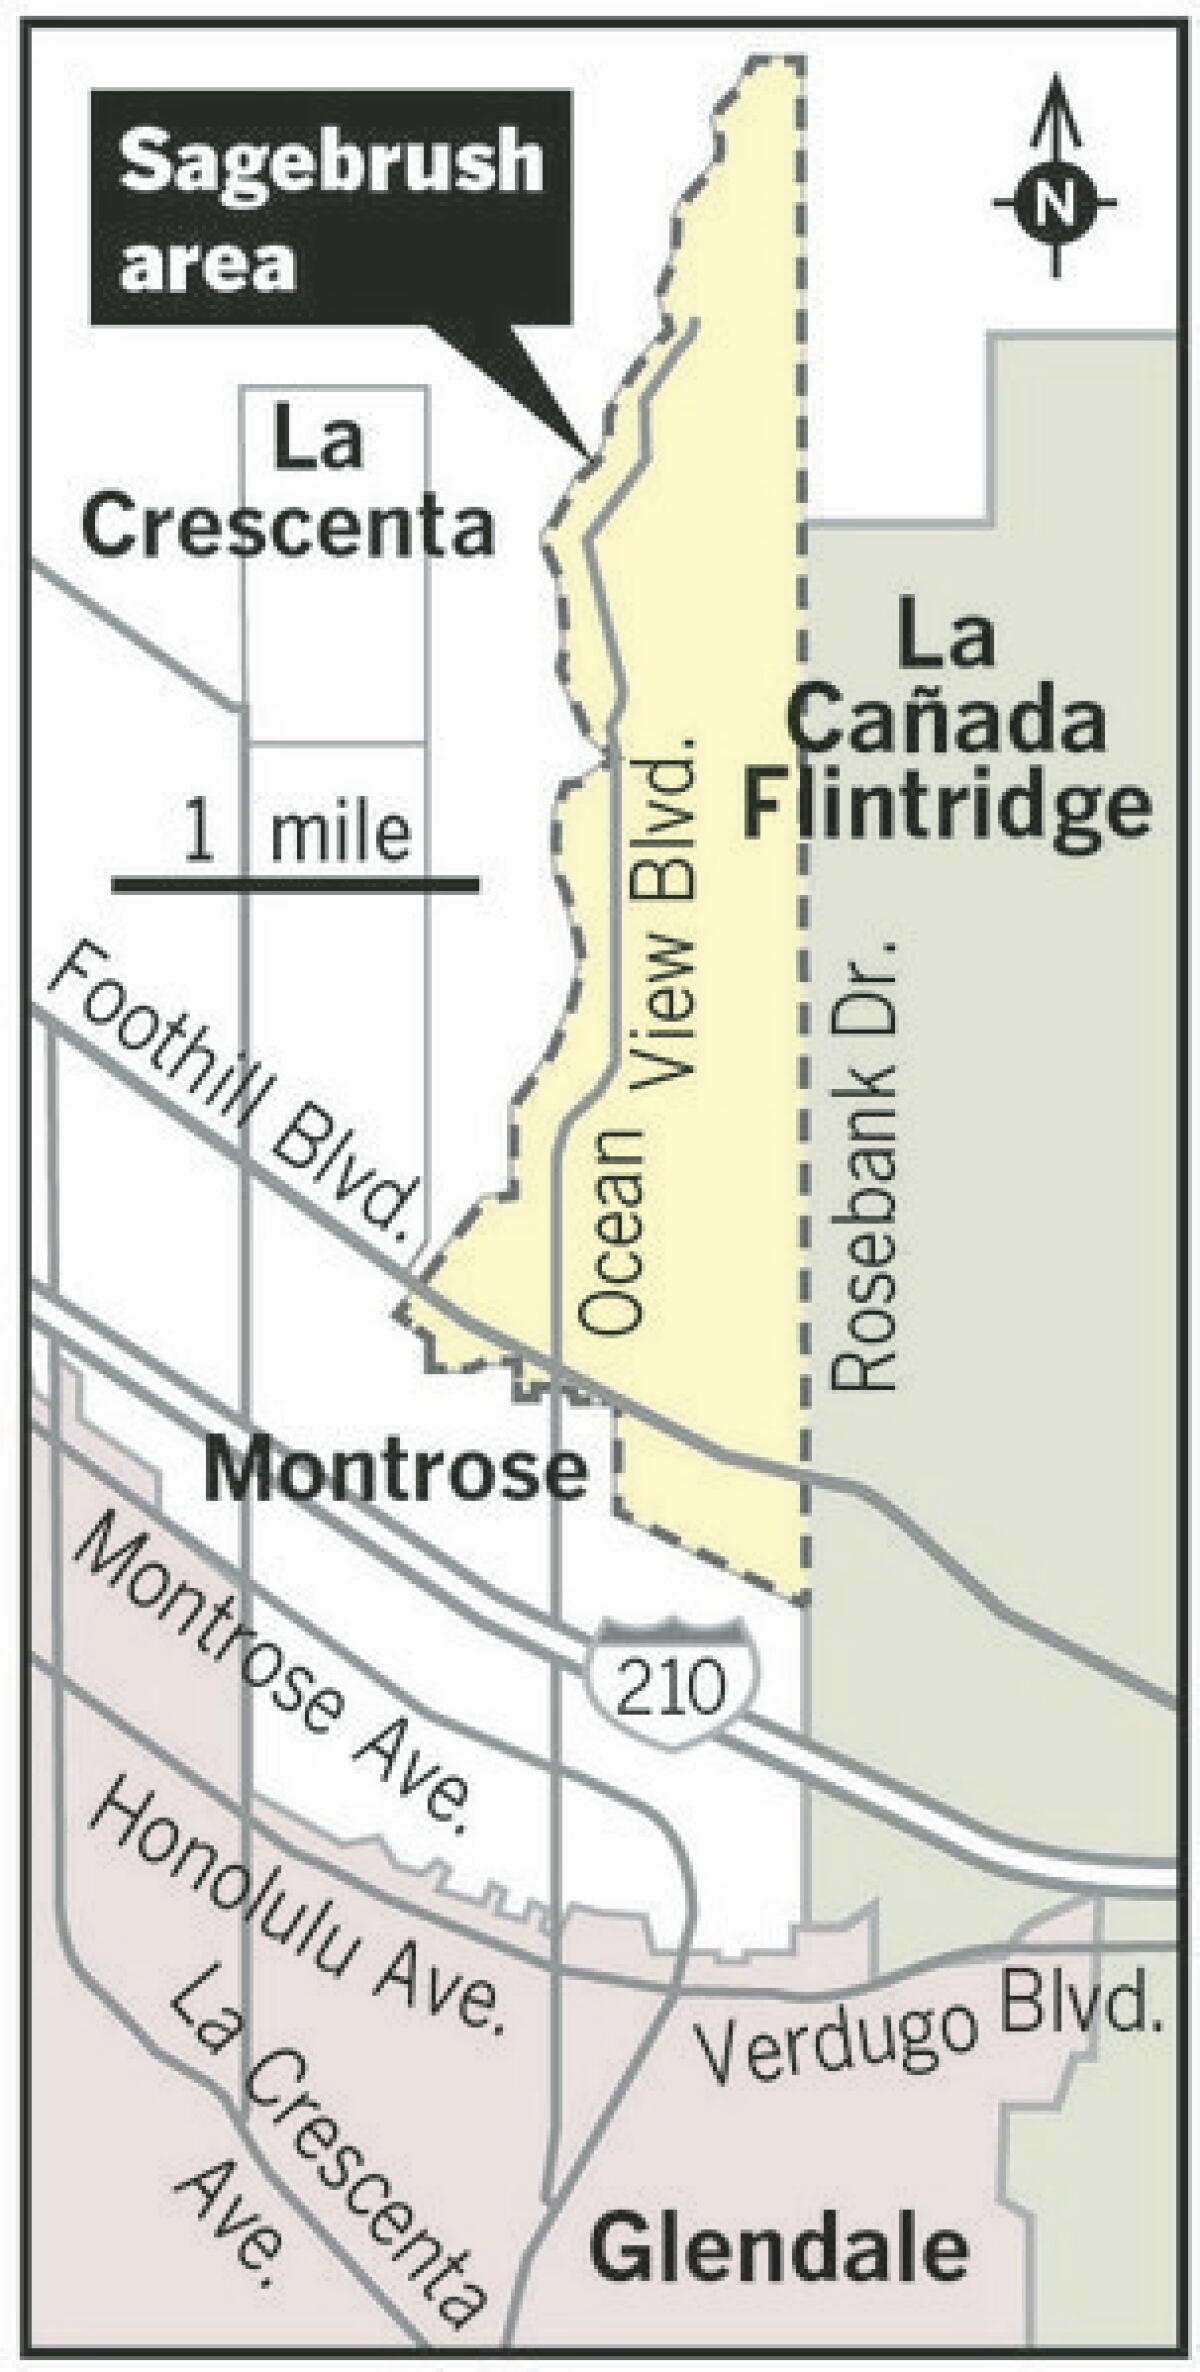 The following illustration shows the "Sagebrush" region, which falls in Glendale Unified¿s boundaries. Parents who live in the area have fought for decades for the opportunity to enroll their children in La Cañada schools. A group of citizens recently formed to initiate the process once again.